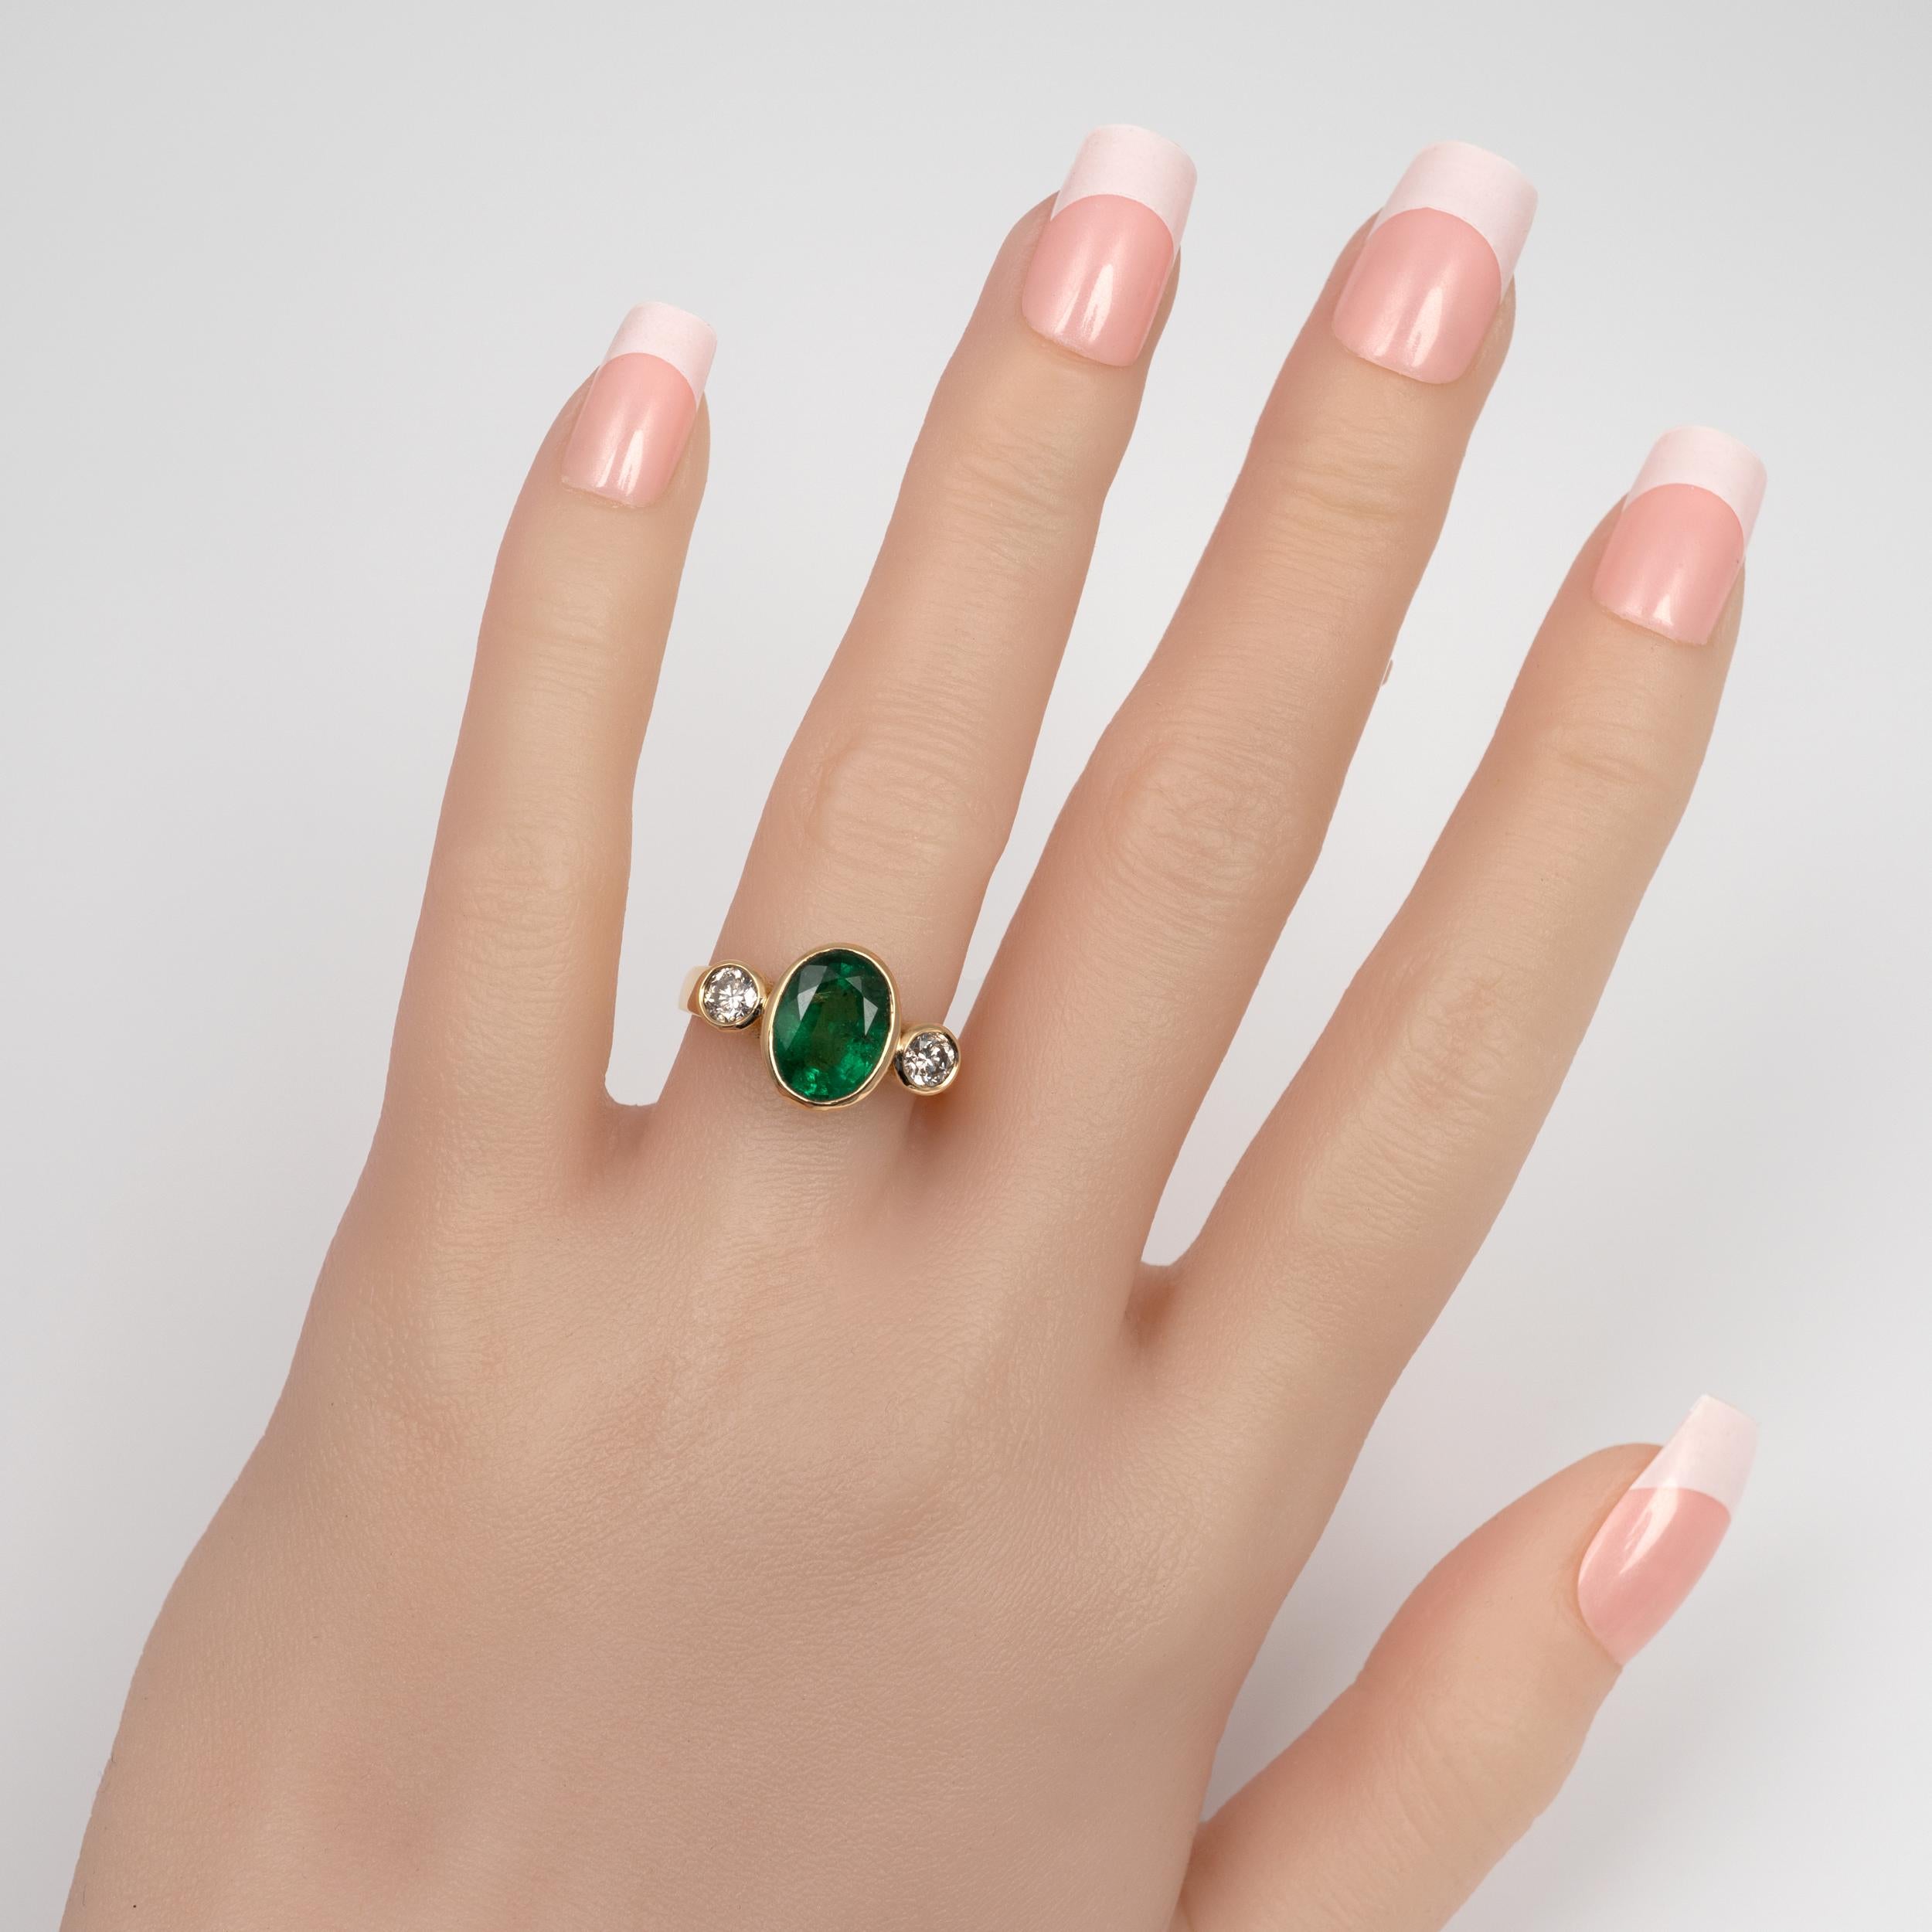 This superb emerald and diamond ring is beautifully crafted in 18 karat gold.

The ring is both striking and beautiful and features, in a classy bezel setting arrangement, a central oval cut 3.5-carat emerald gemstone is flanked by round-cut